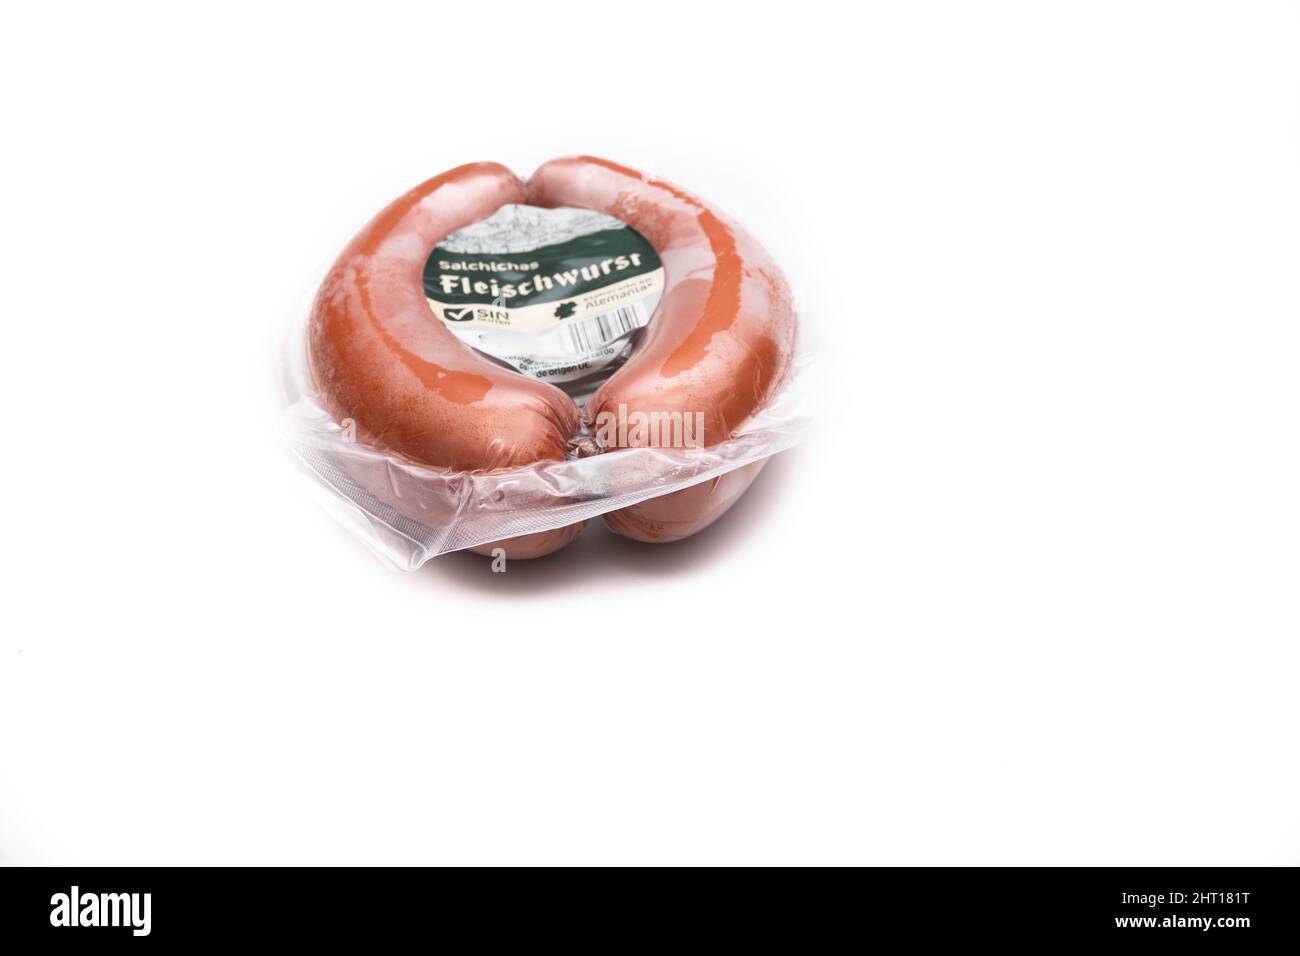 Packaged fleischwurst hi-res stock - photography Alamy images and